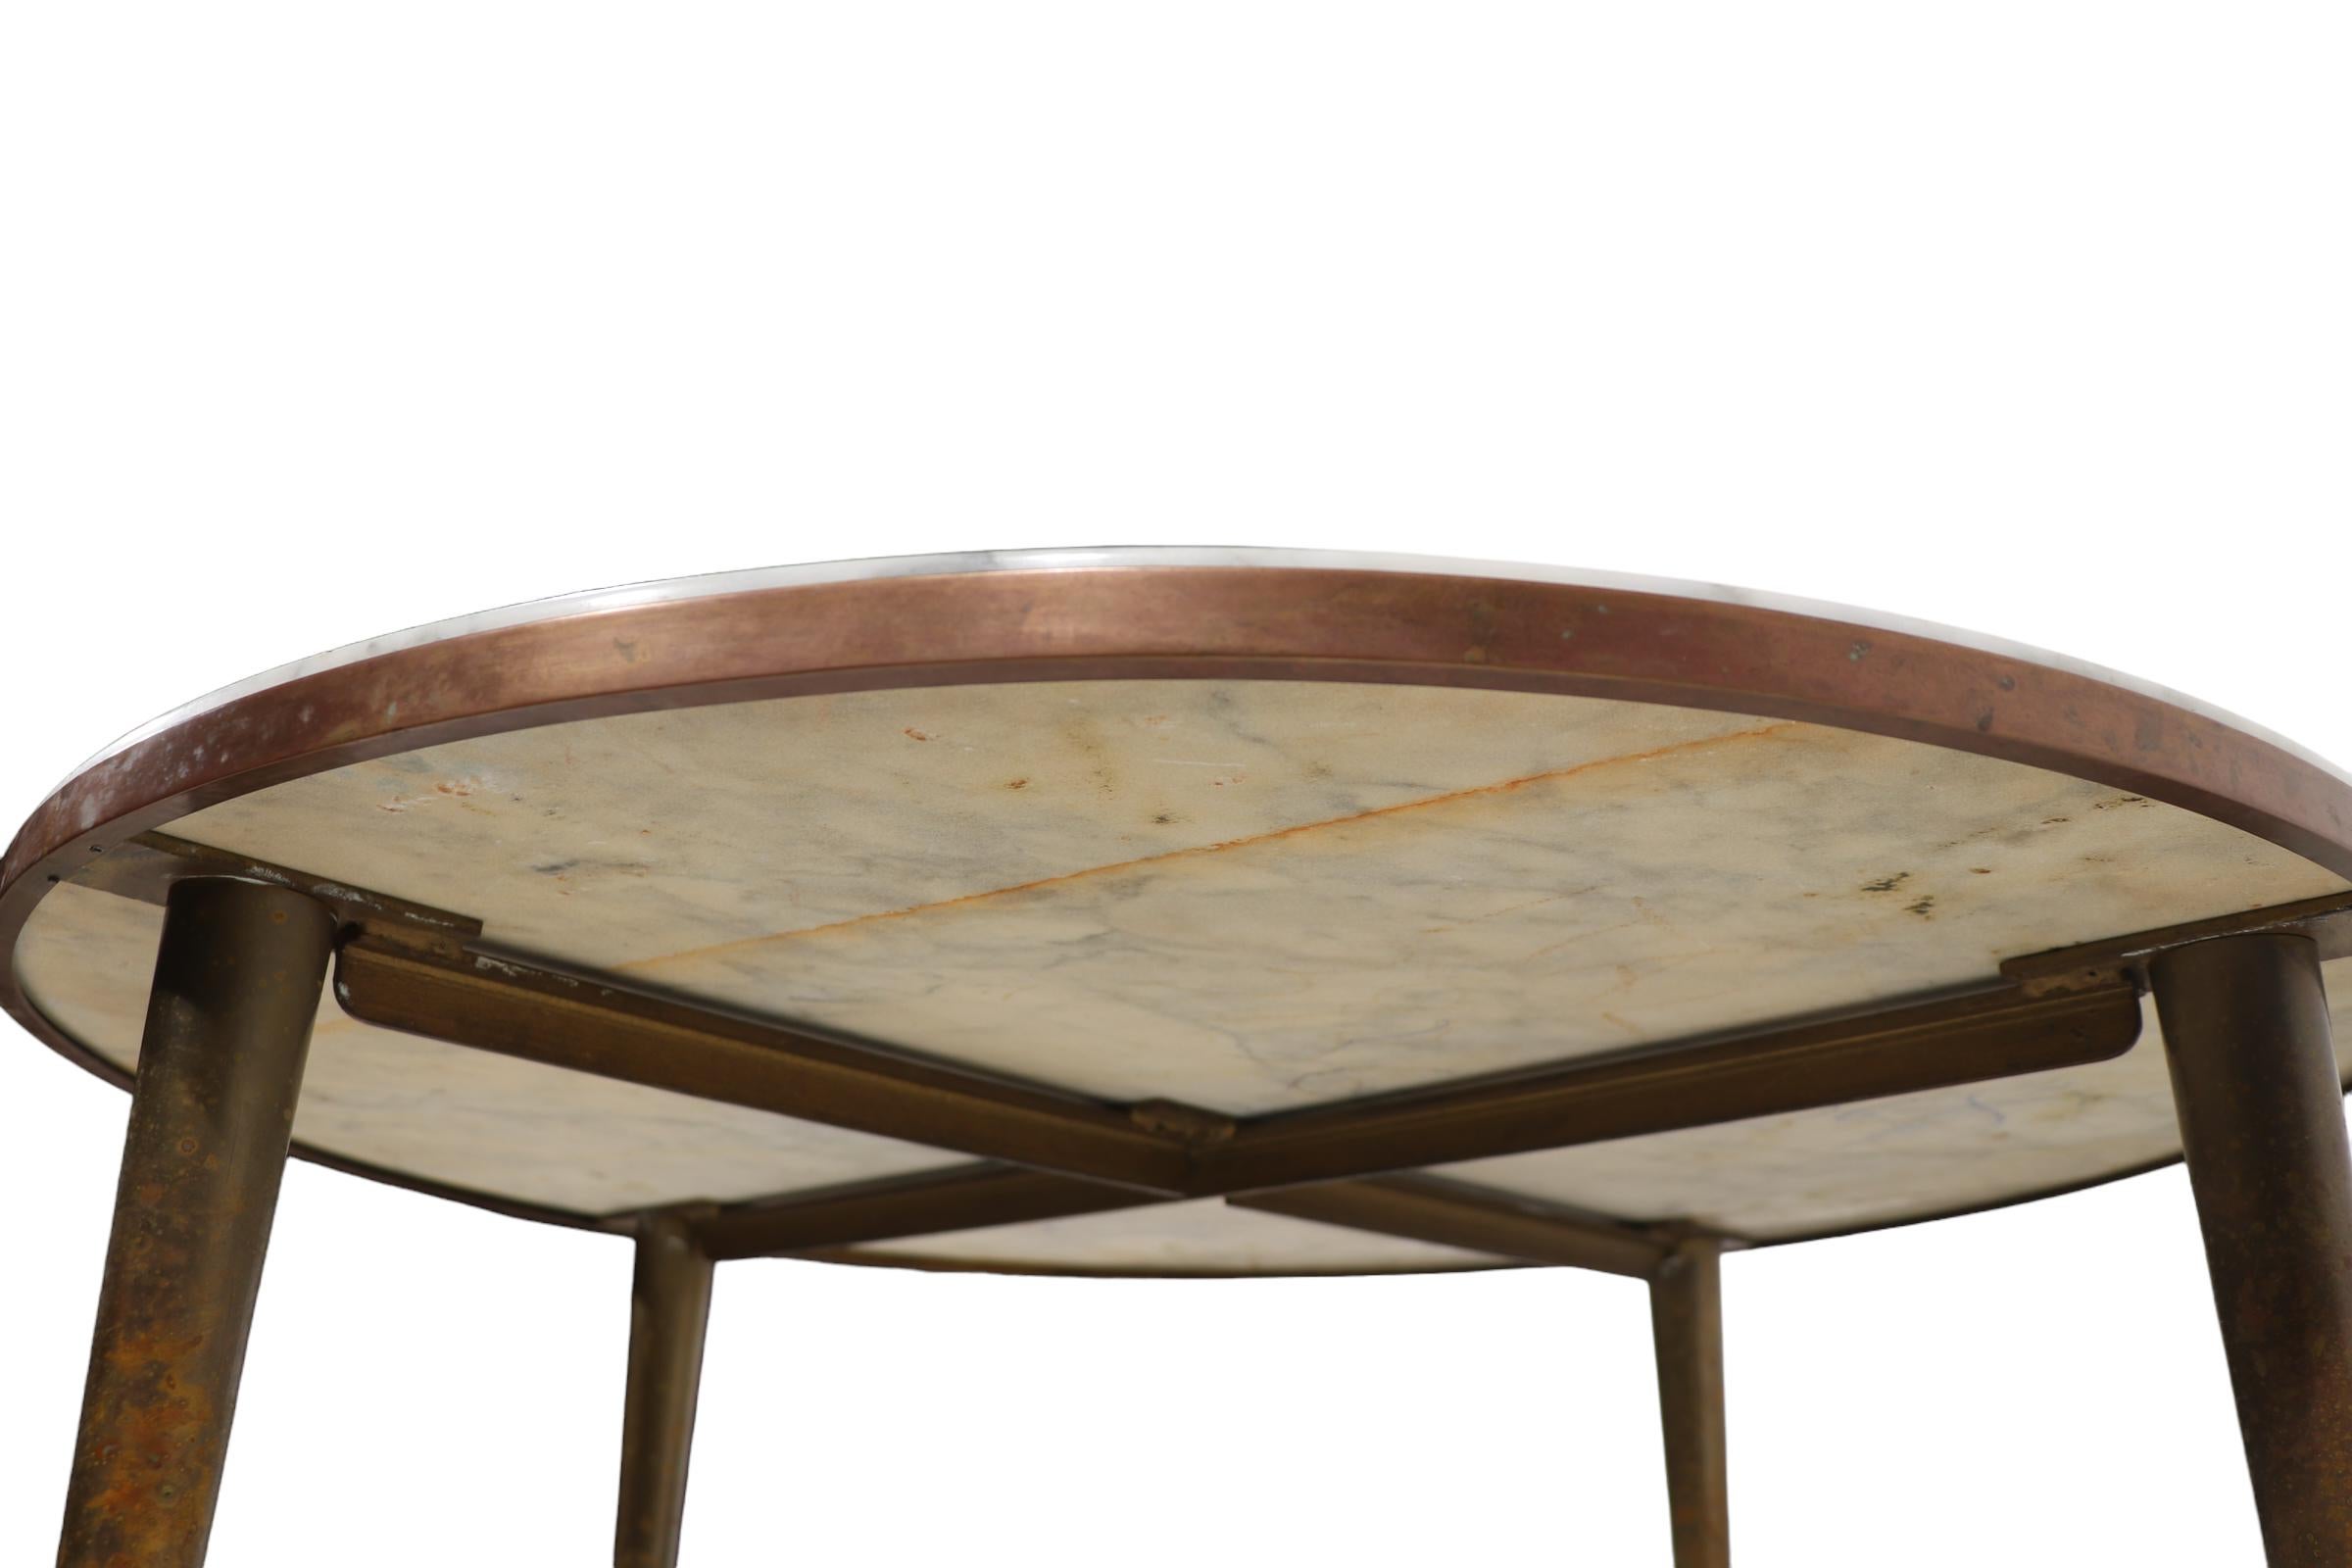   Round Italian Mid Century Marble Top Coffee Table w/ Brass  Tapered Pole Legs 9